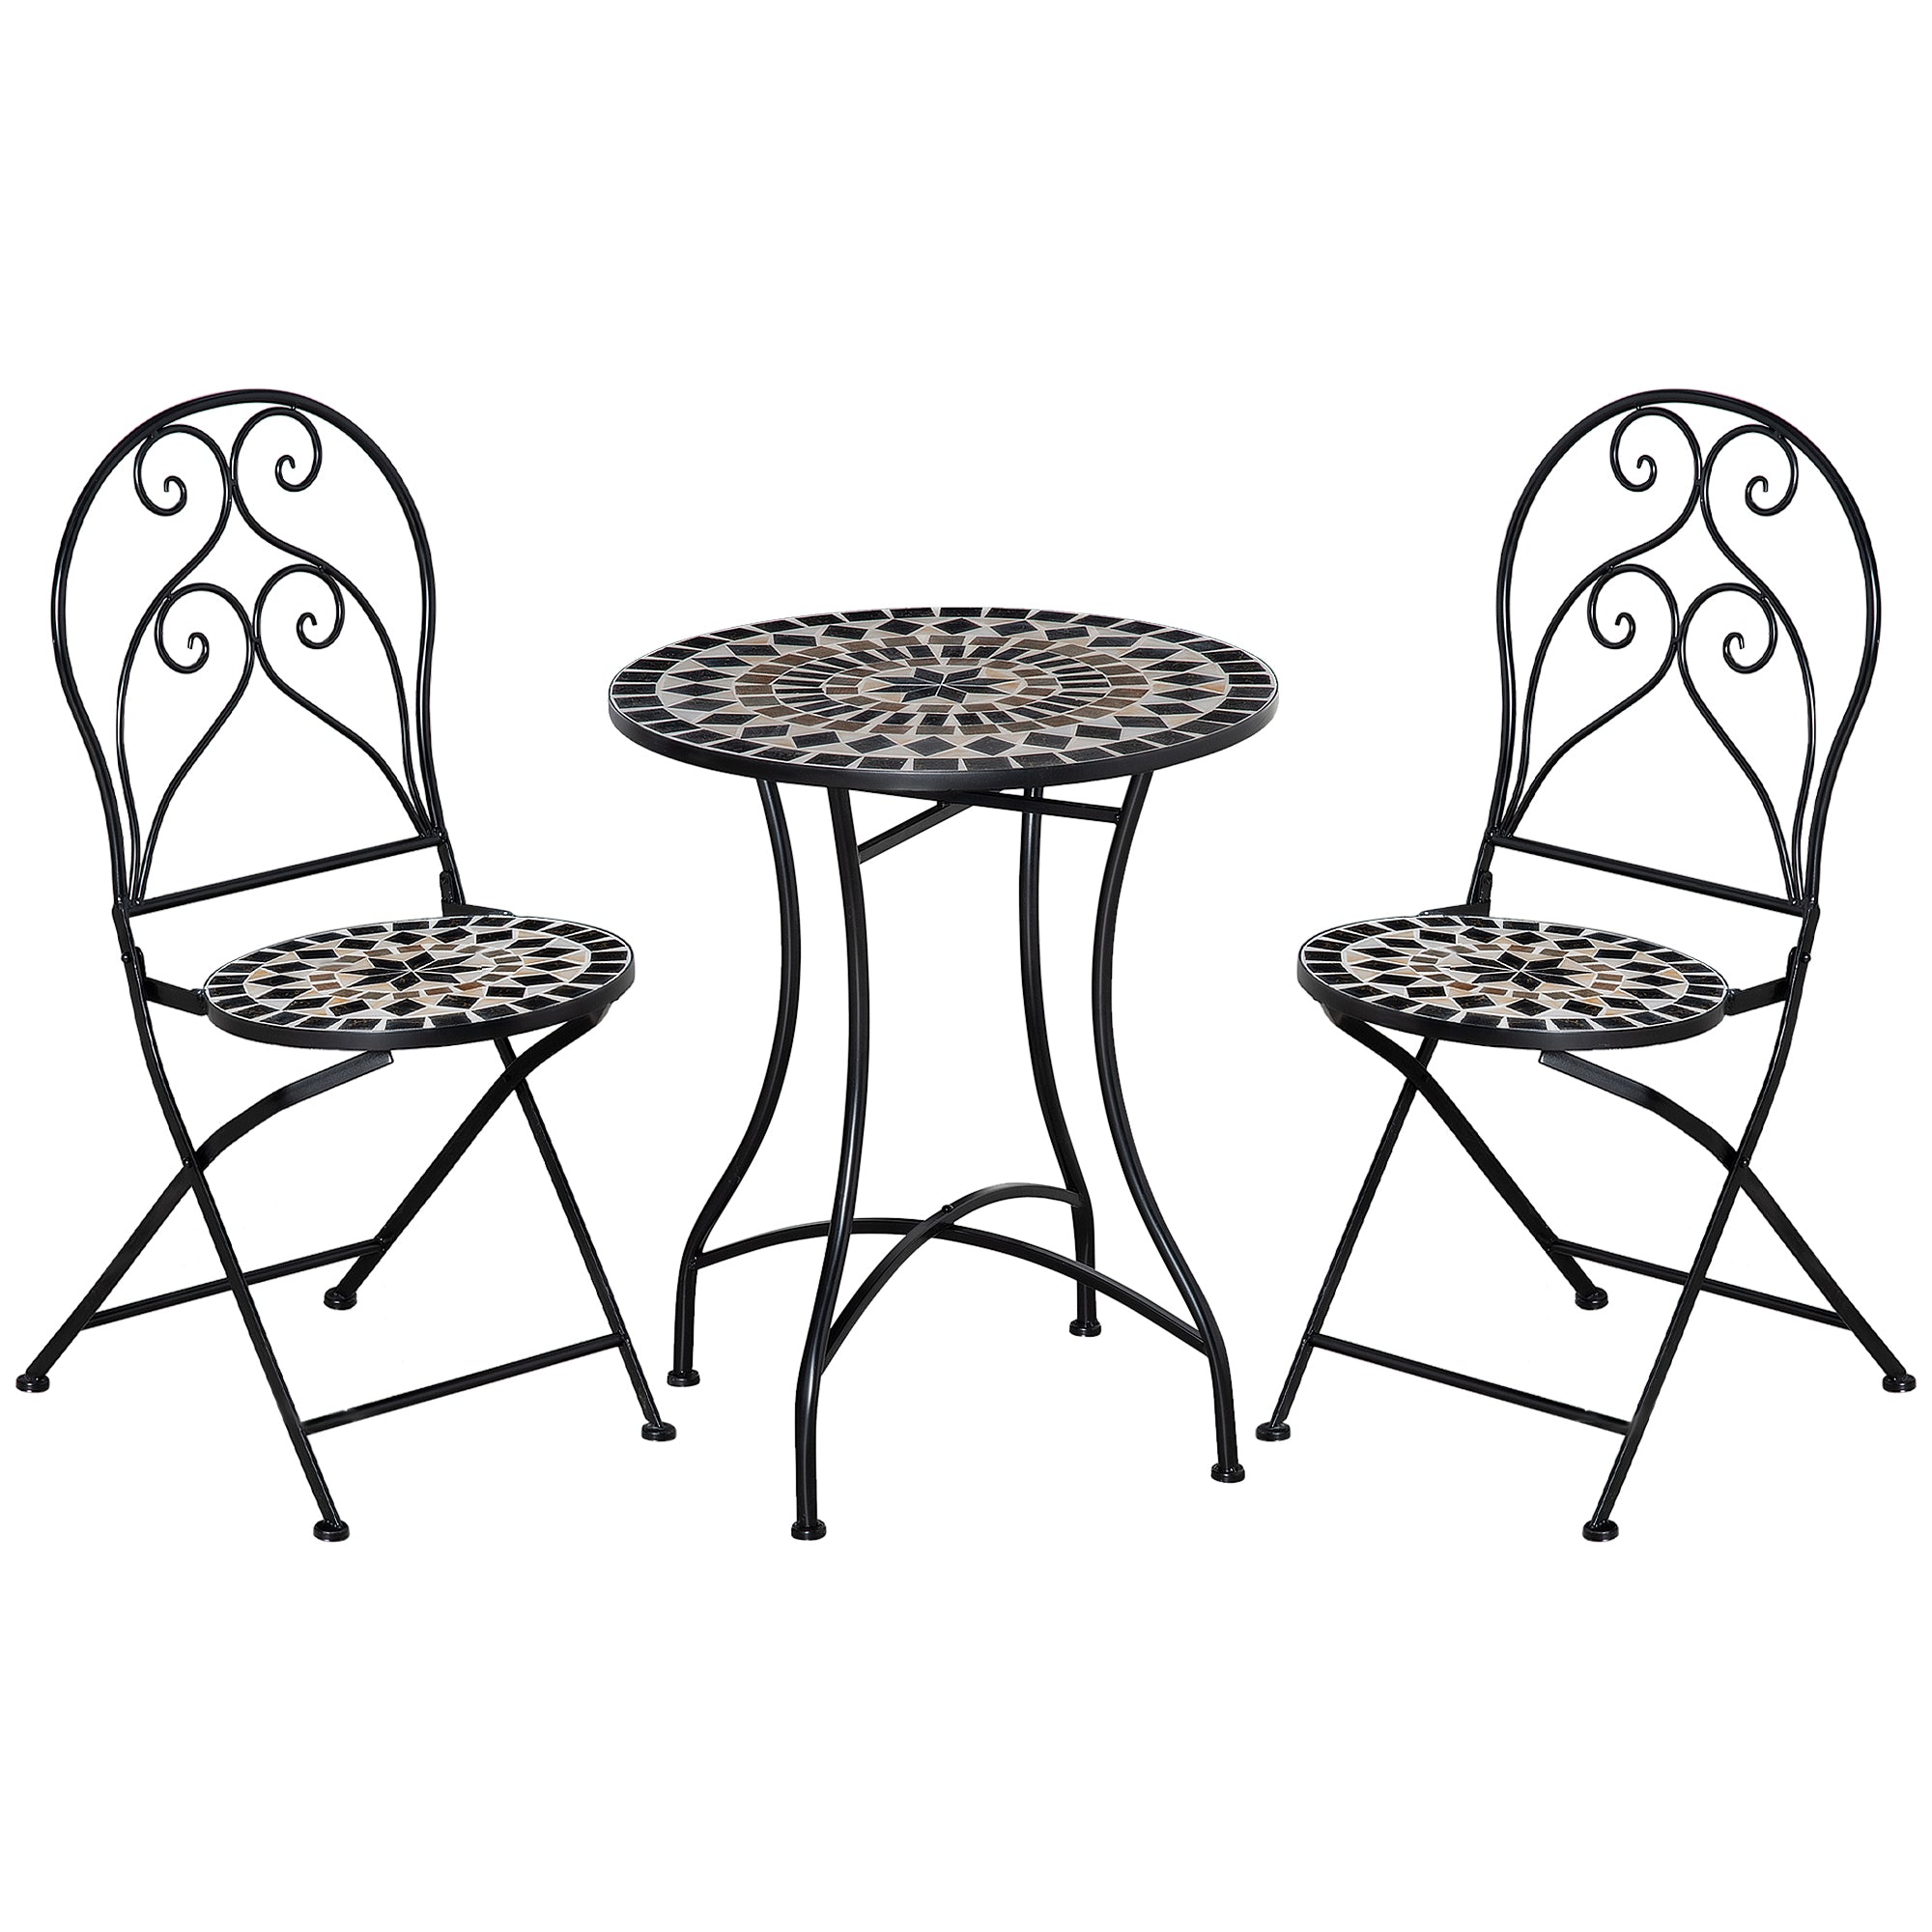 Outsunny 3 PCs Garden Bistro Set W/ Balcony Table and Chairs Metal Frame  | TJ Hughes